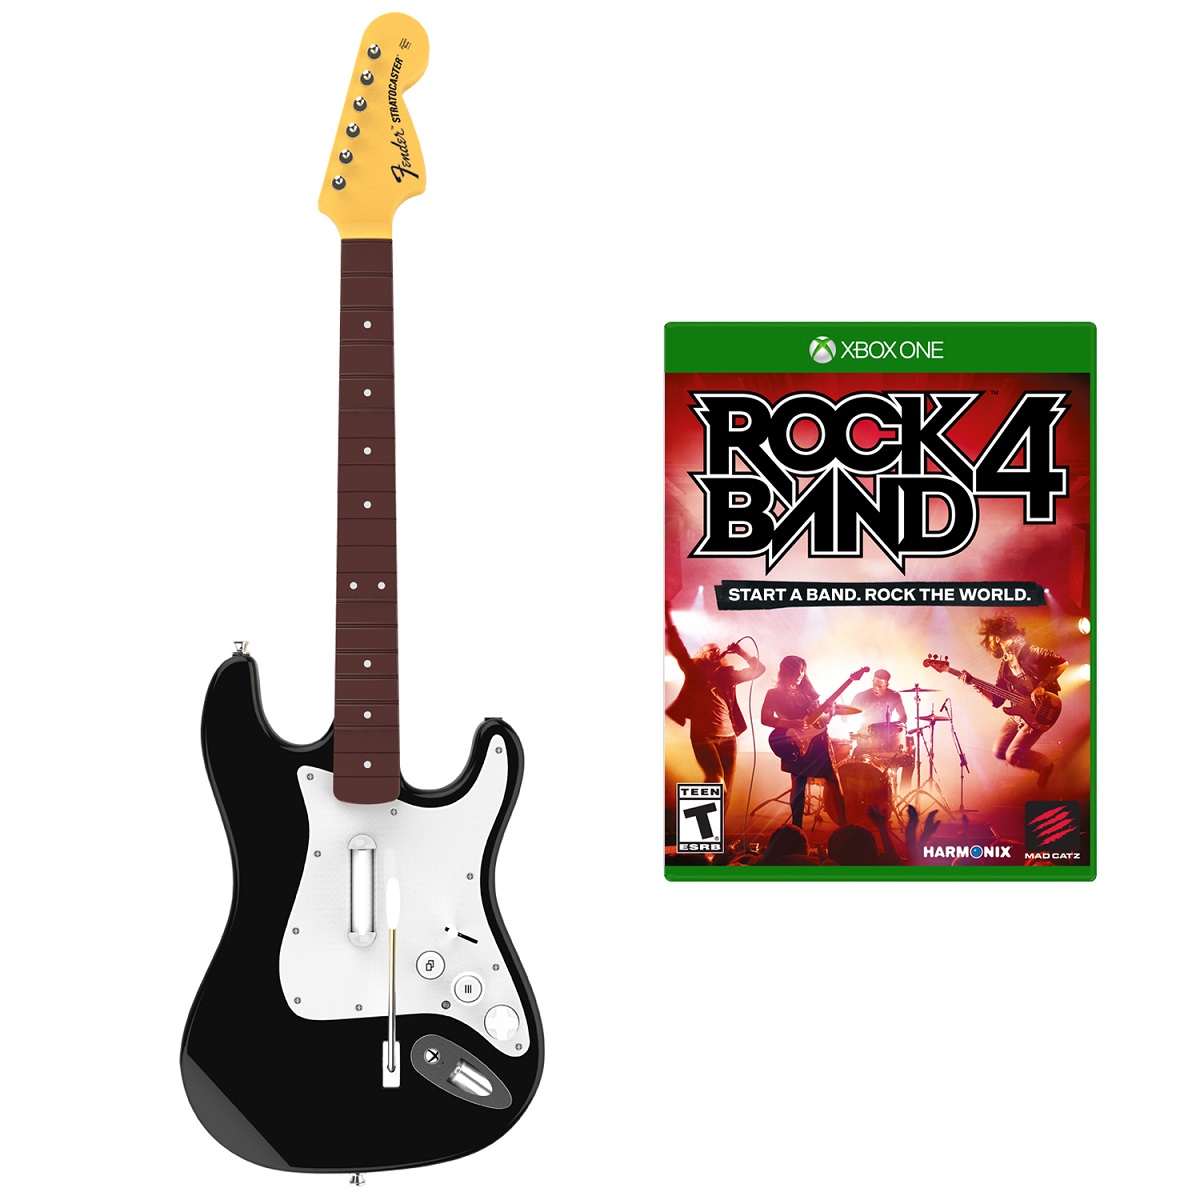 Rock Band 4 Wireless Fender Stratocaster Guitar Controller Bundle - Xbox One